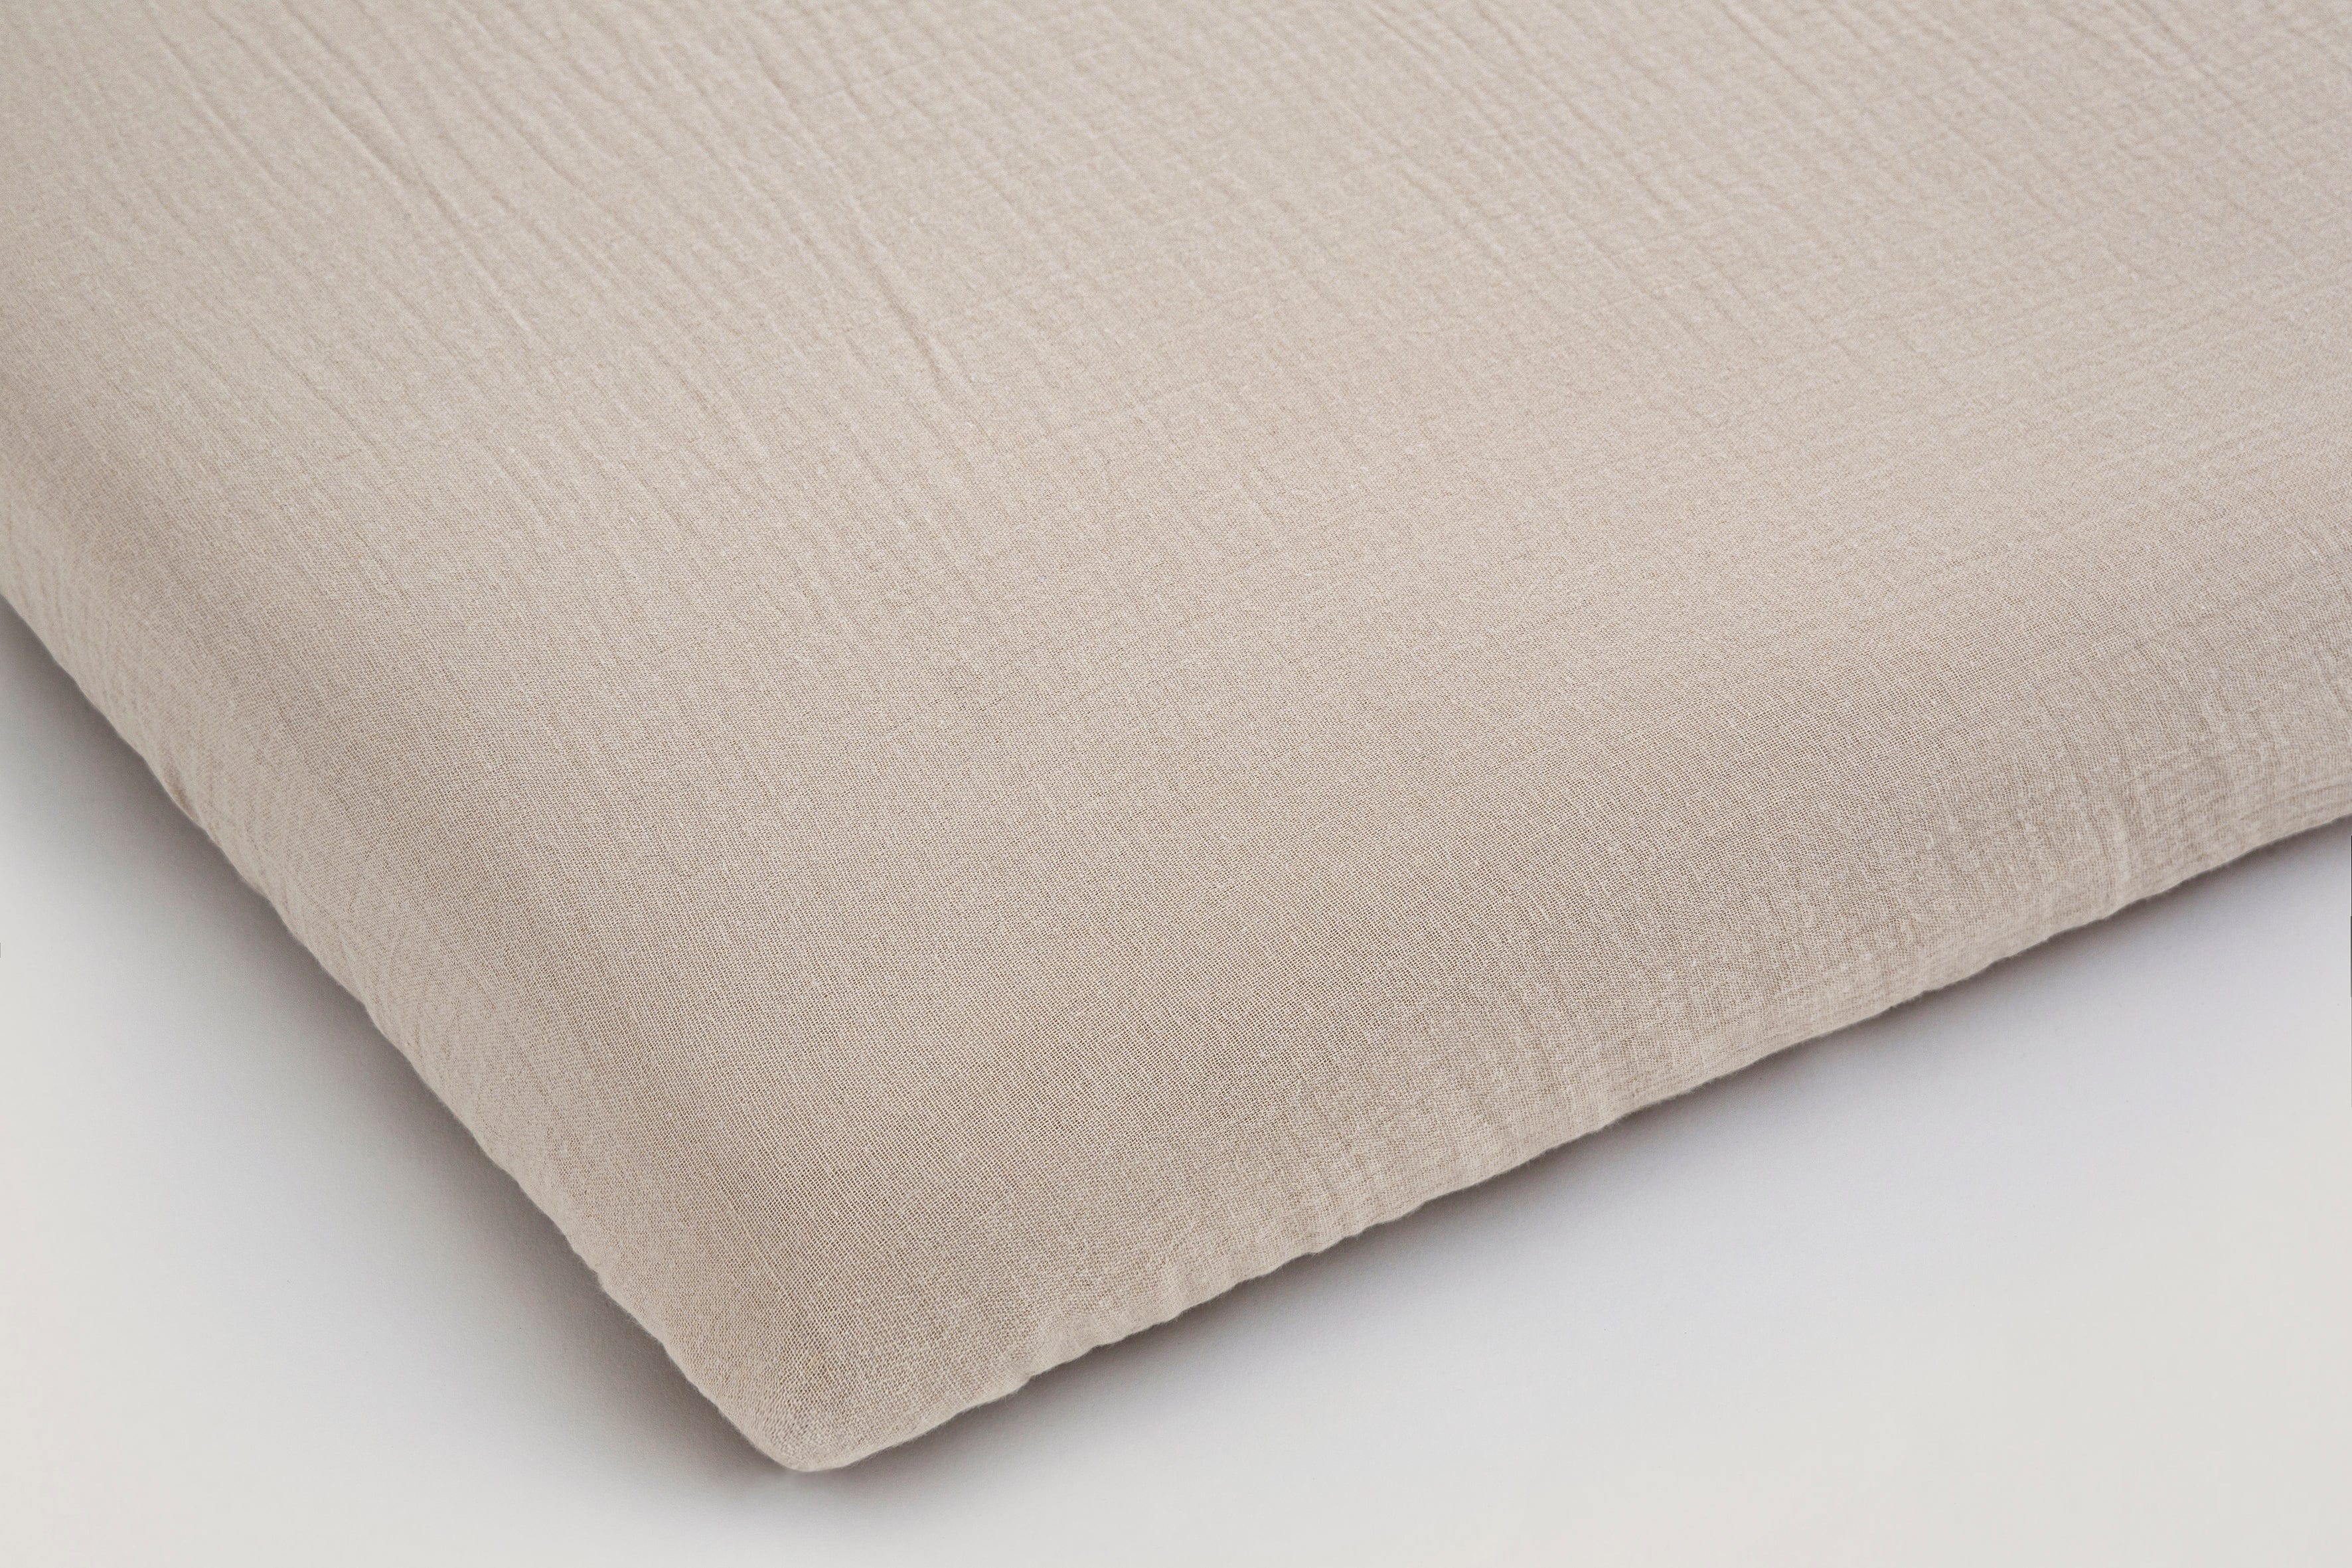 Muslin fitted sheet sand for MARTHA